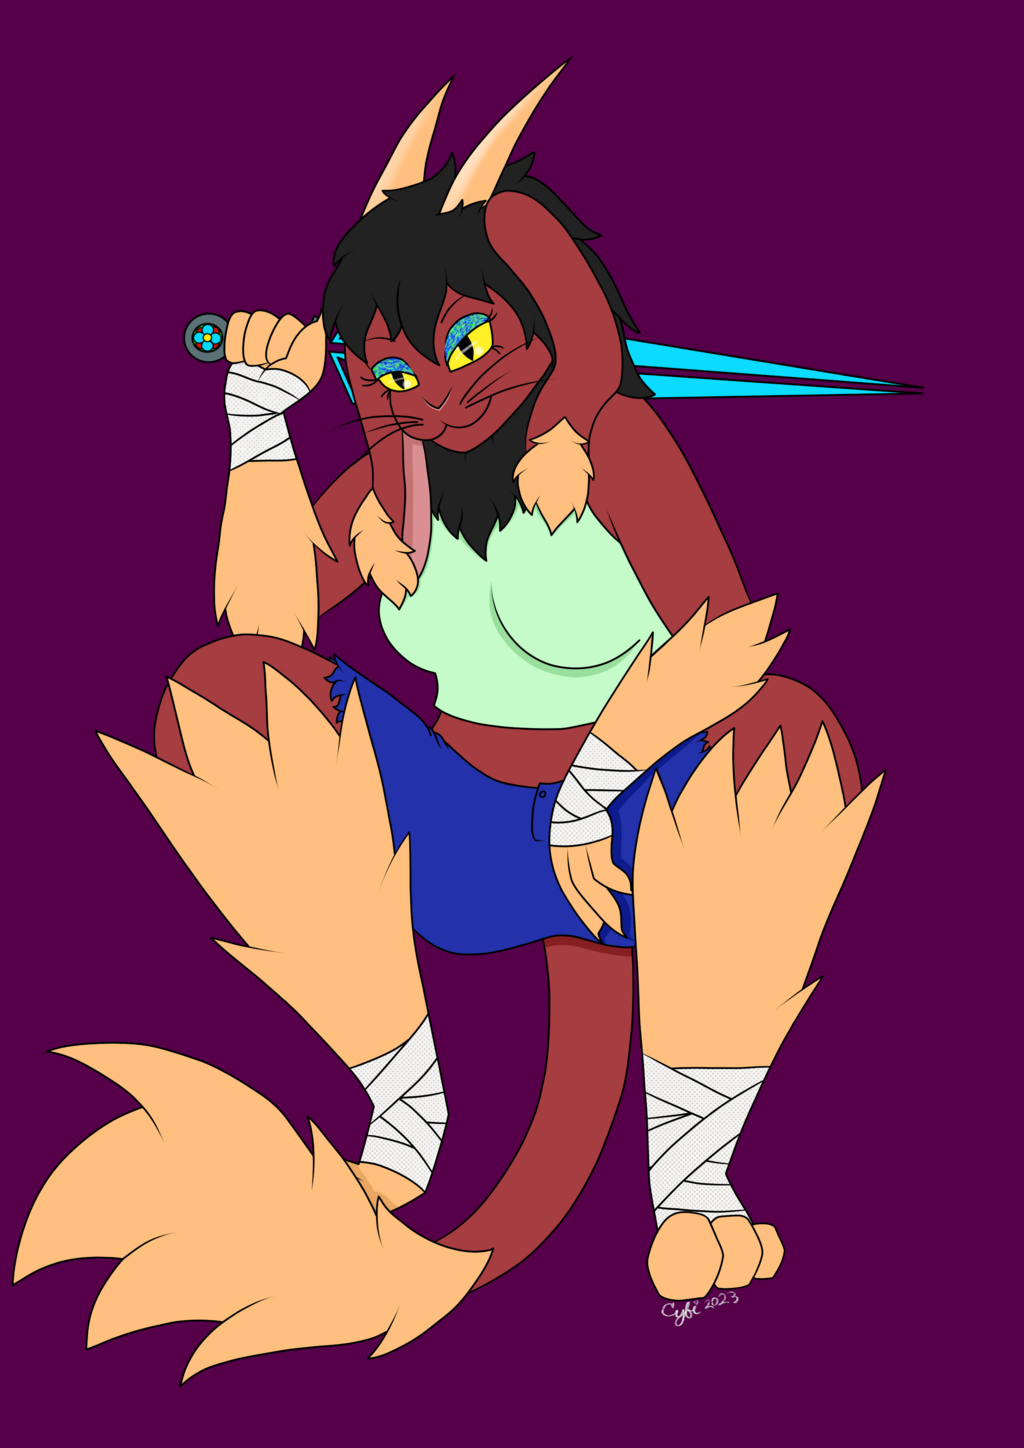 Most recent image: Elisia assists (redesign)